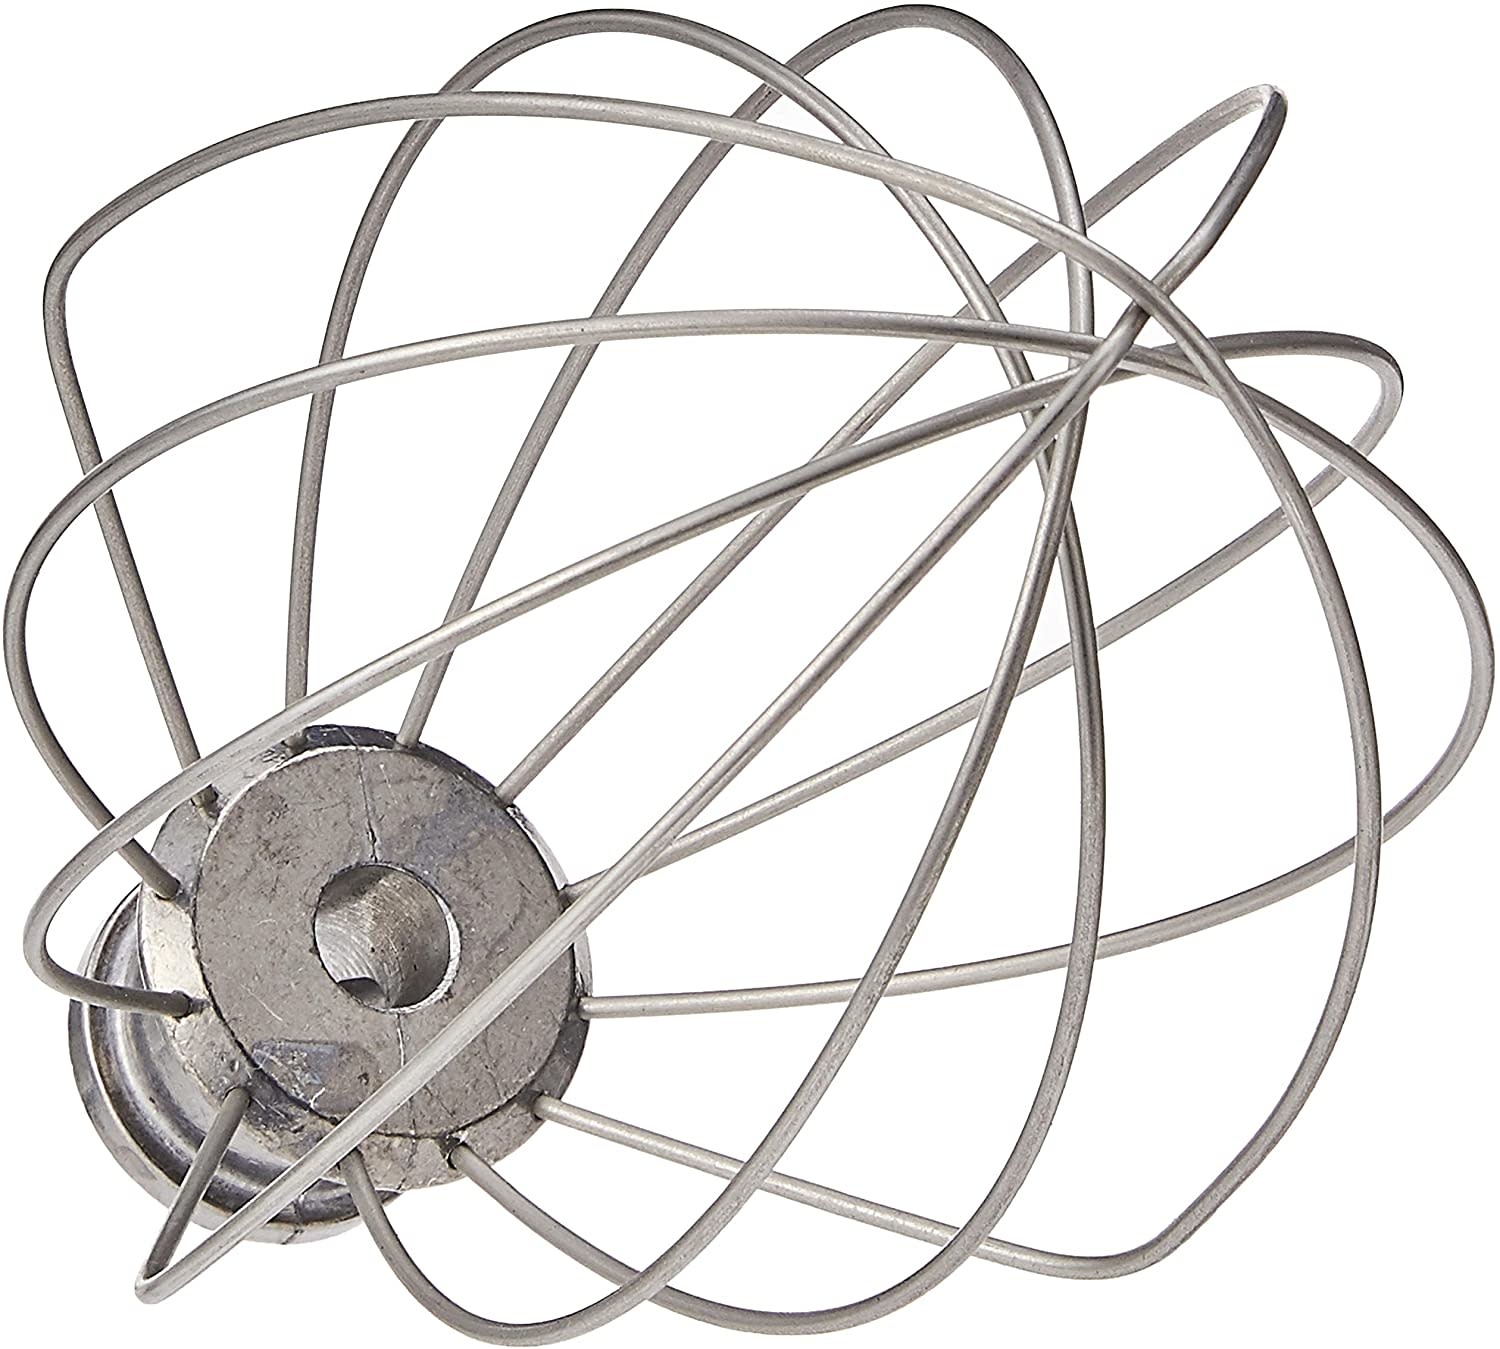 Kitchenaid Replacement Wire Whip For 5 Quart Lift Machines 